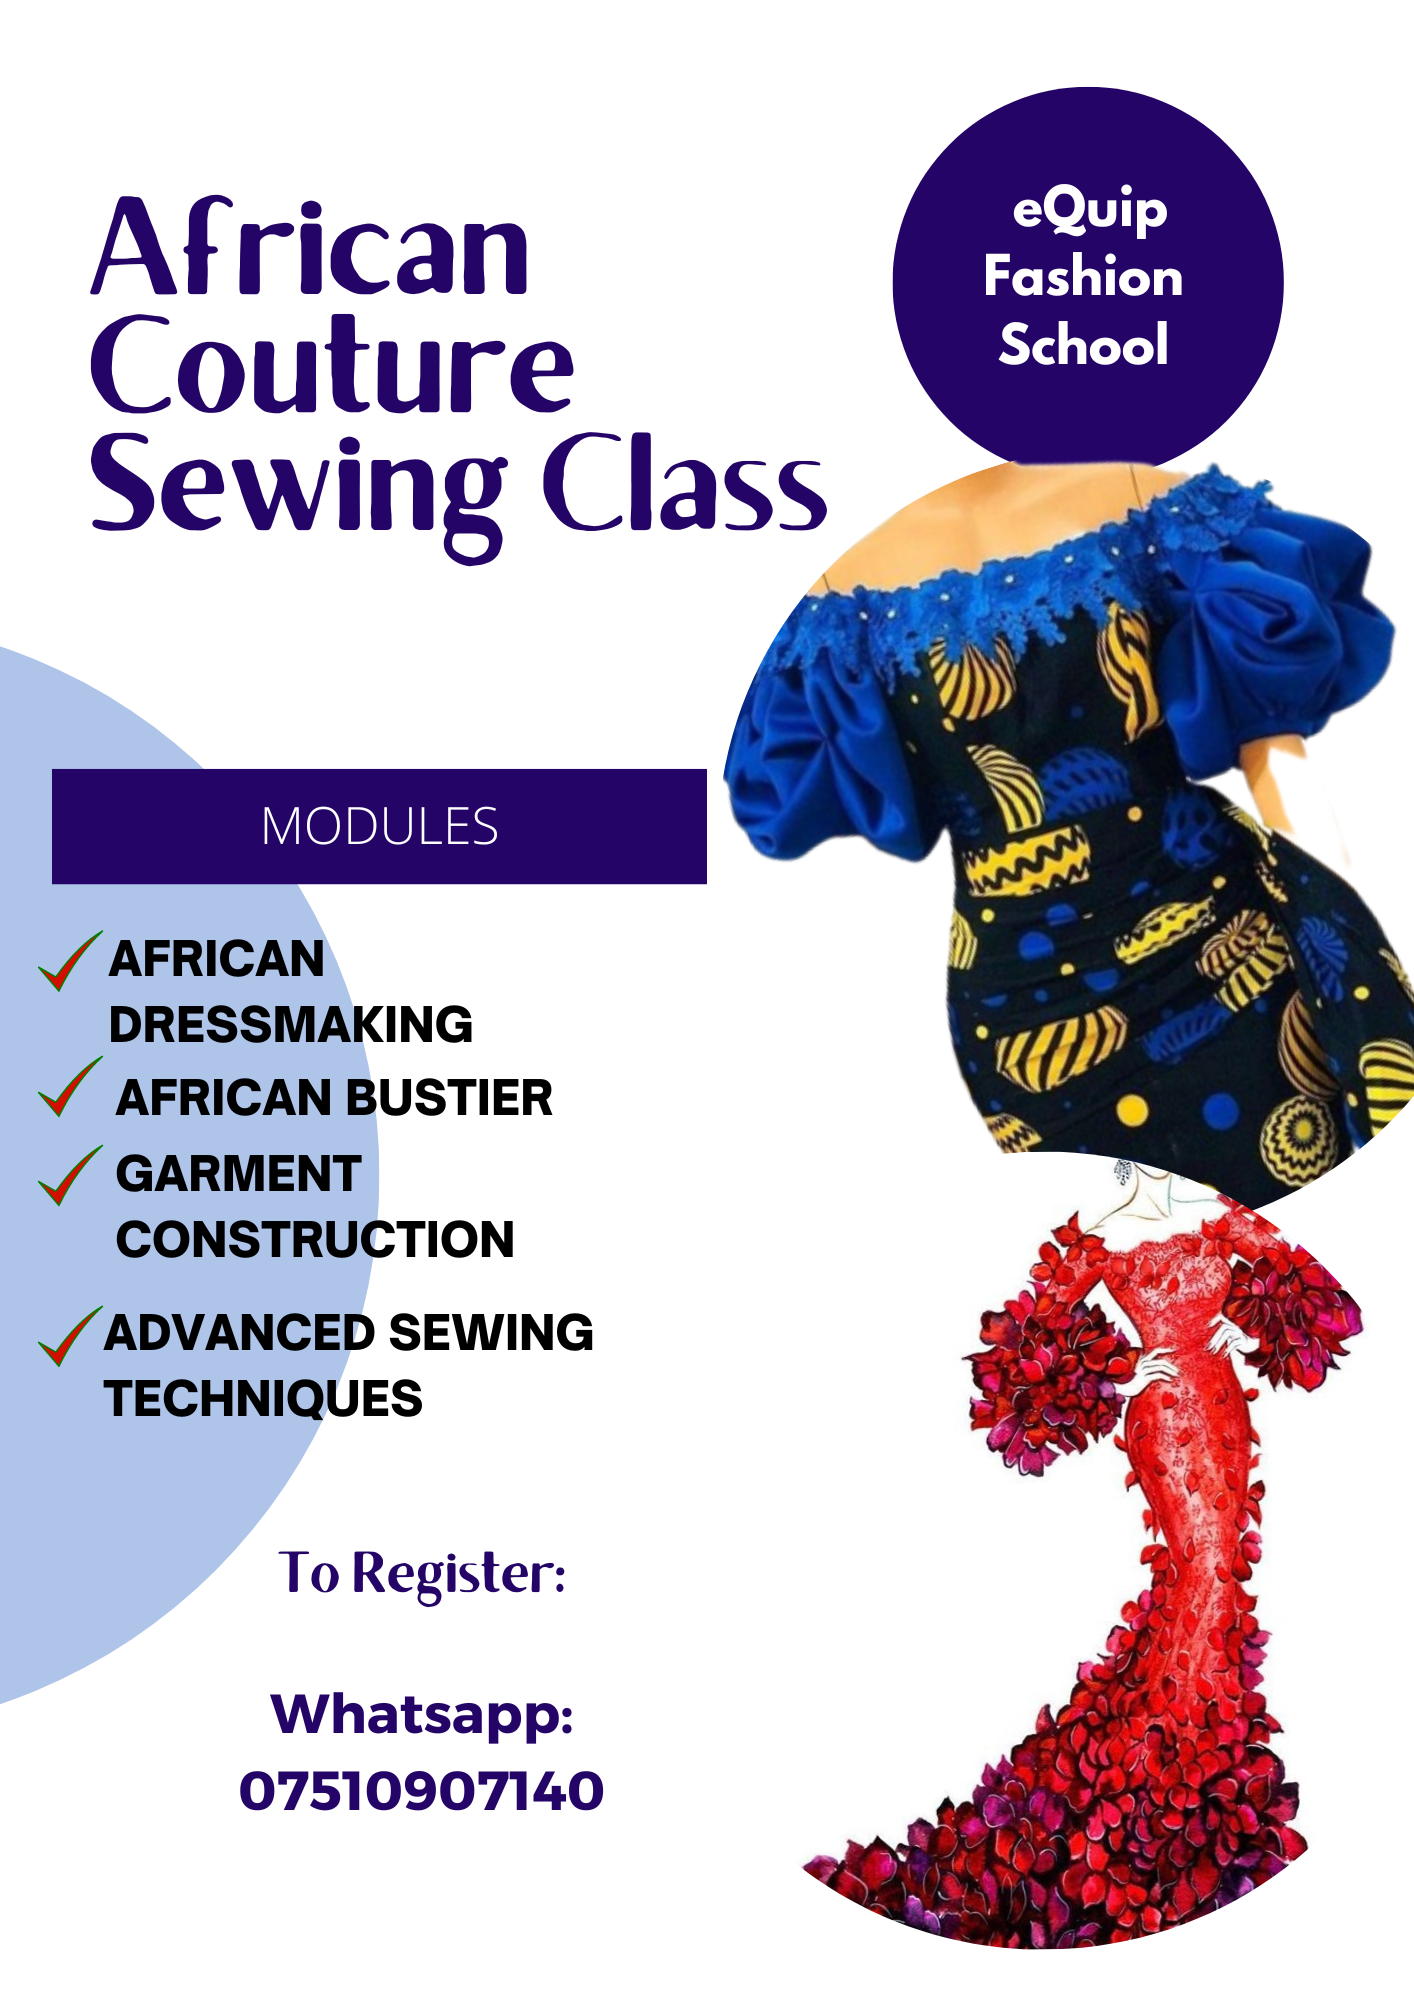 AFRICAN COUTURE SEWING CLASS